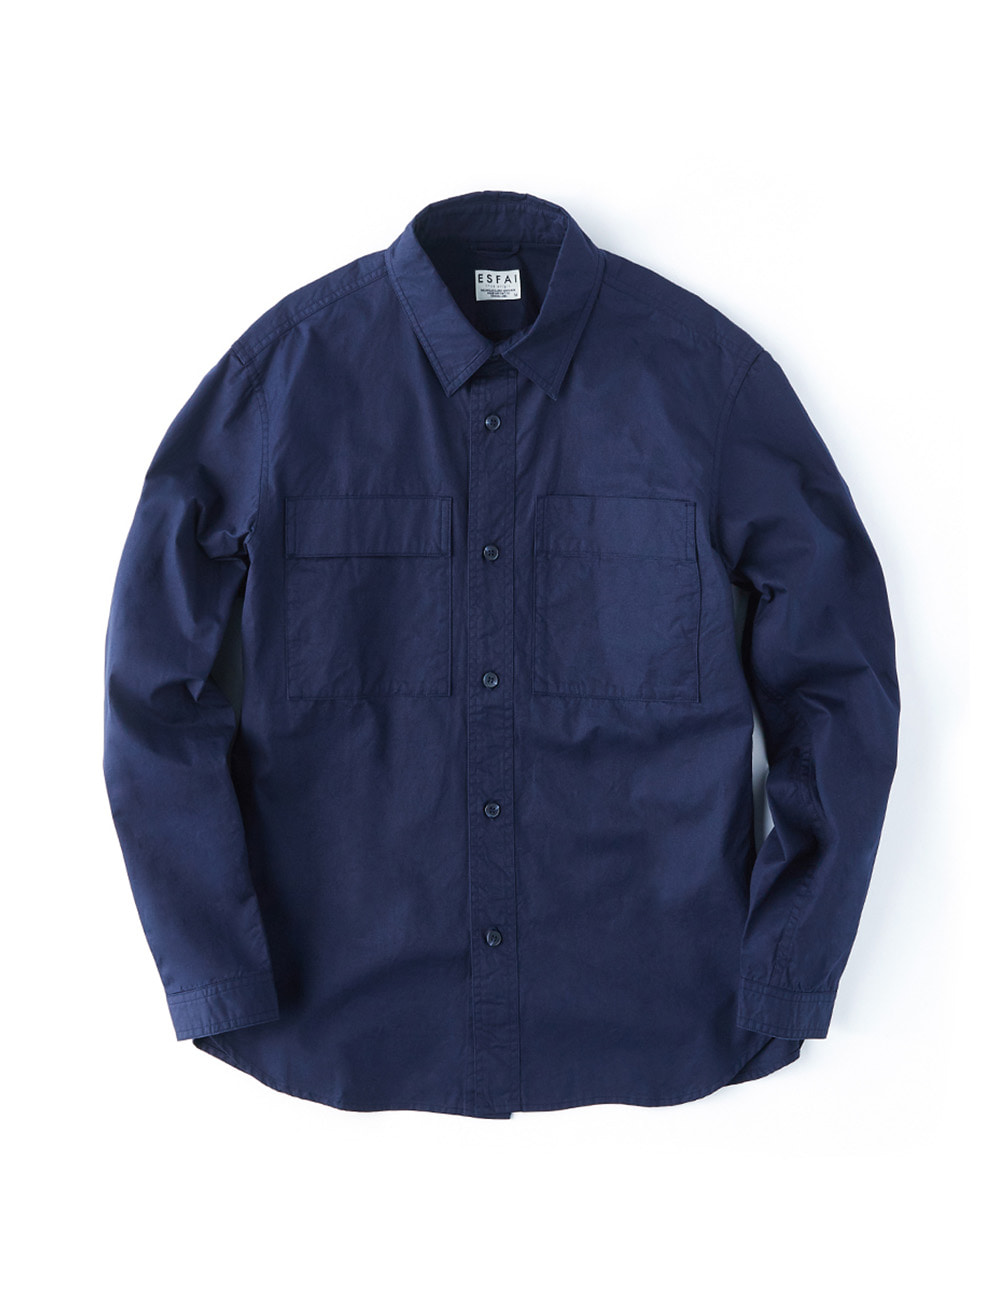 [ESFAI] Two-Sided Pocket Shirt (Navy)